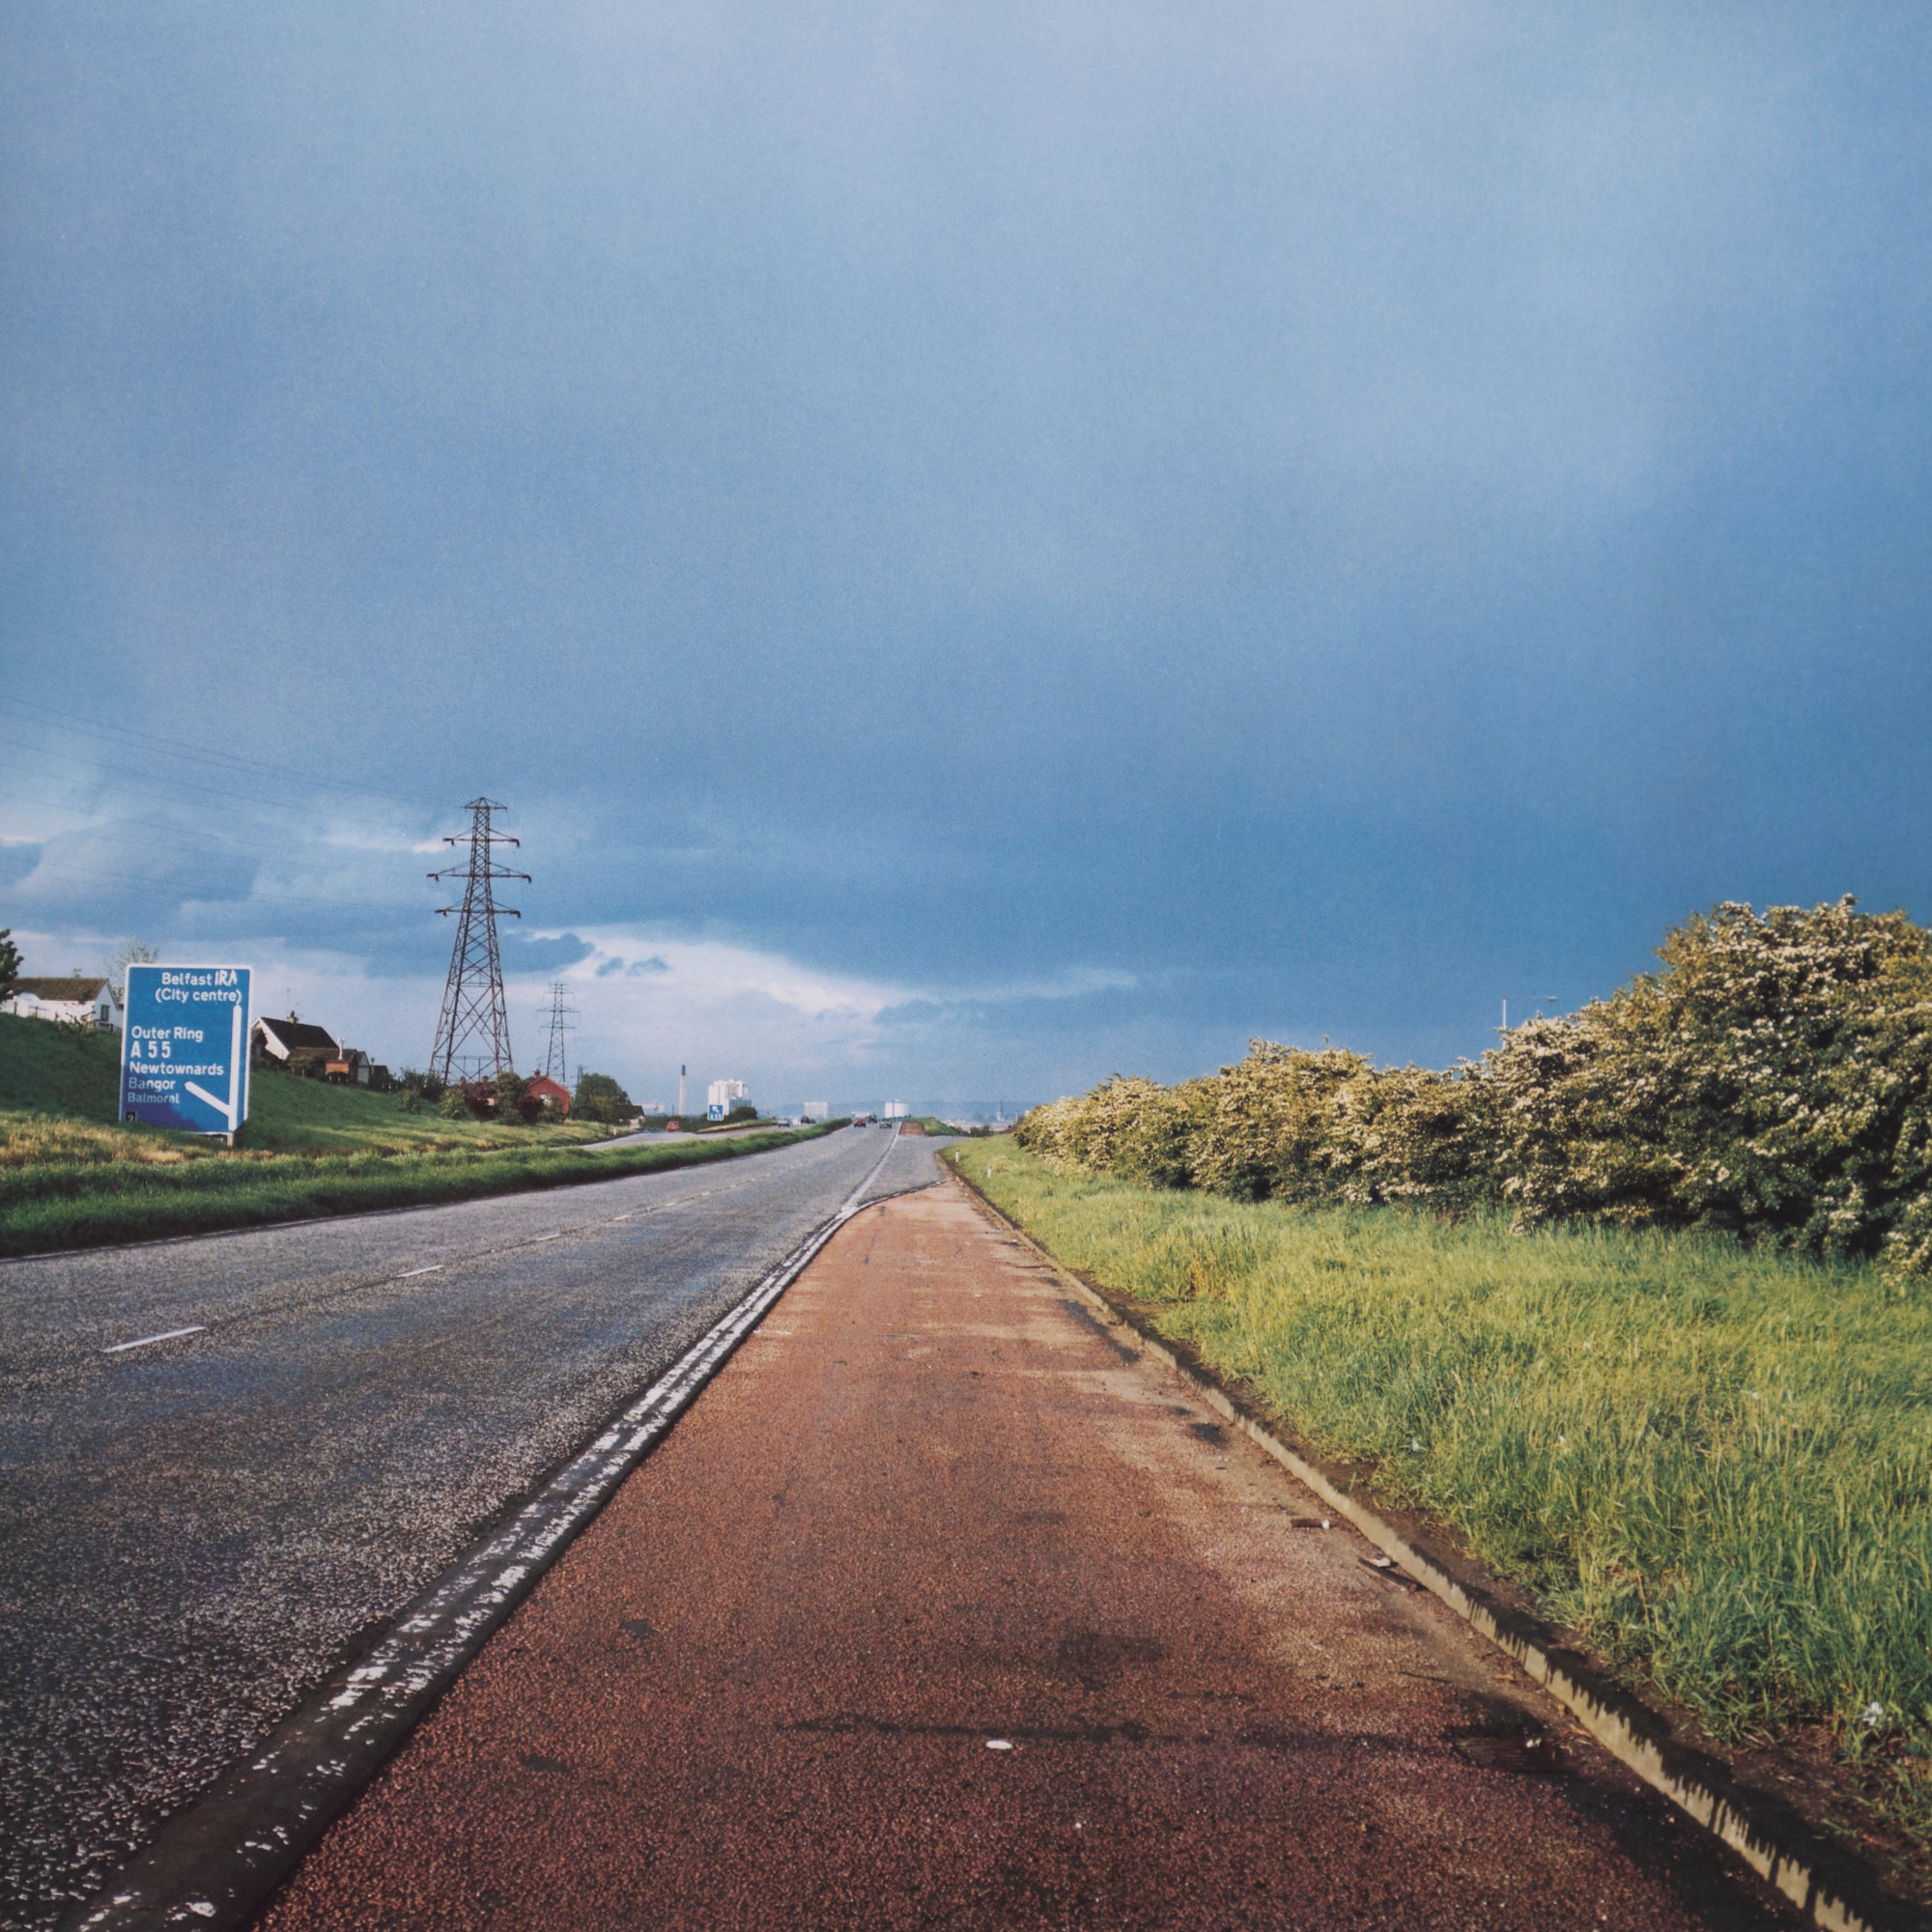 Paul Graham - Troubled Land (Give away)